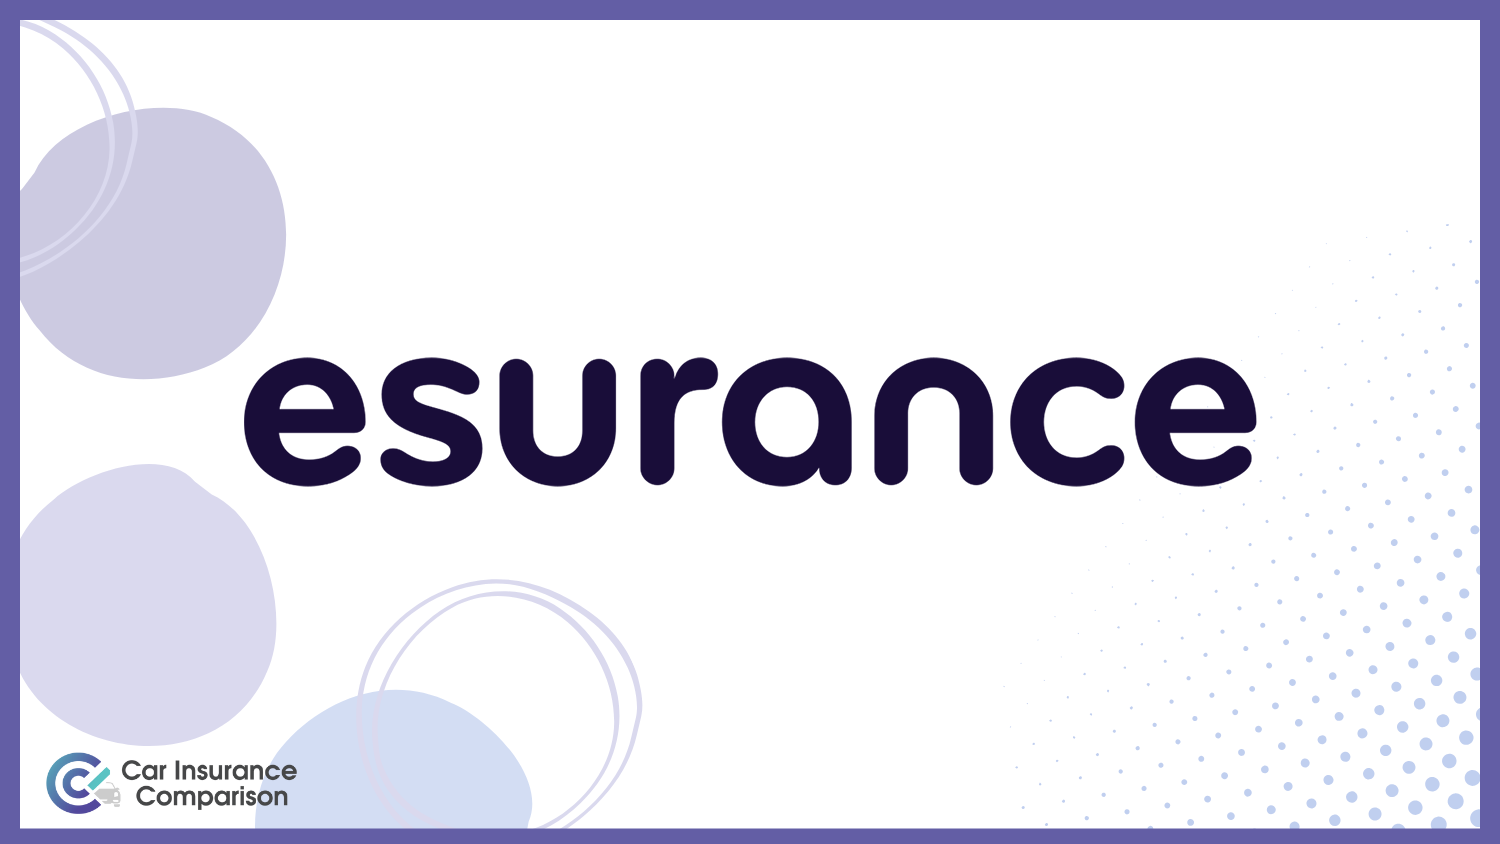 Esurance: Best Car Insurance for Undocumented Immigrants